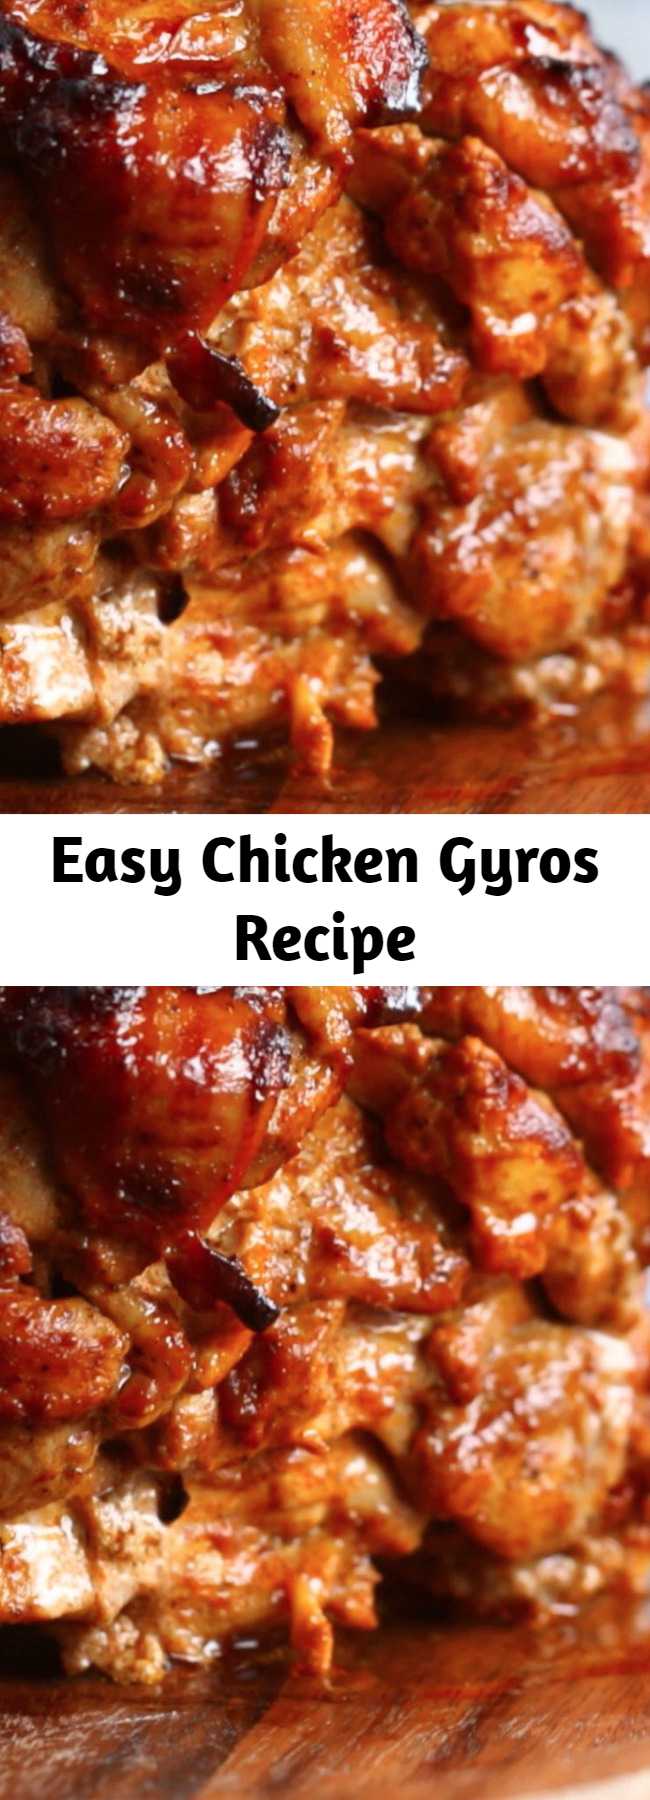 Easy Chicken Gyros Recipe - The marinade for the chicken is so sensational that I use it even when I'm not making Gyros! This is fantastic for entertaining because you can just lay it all out for guests to help themselves. The smell when the chicken is cooking is incredible - you can really smell the oregano and garlic!